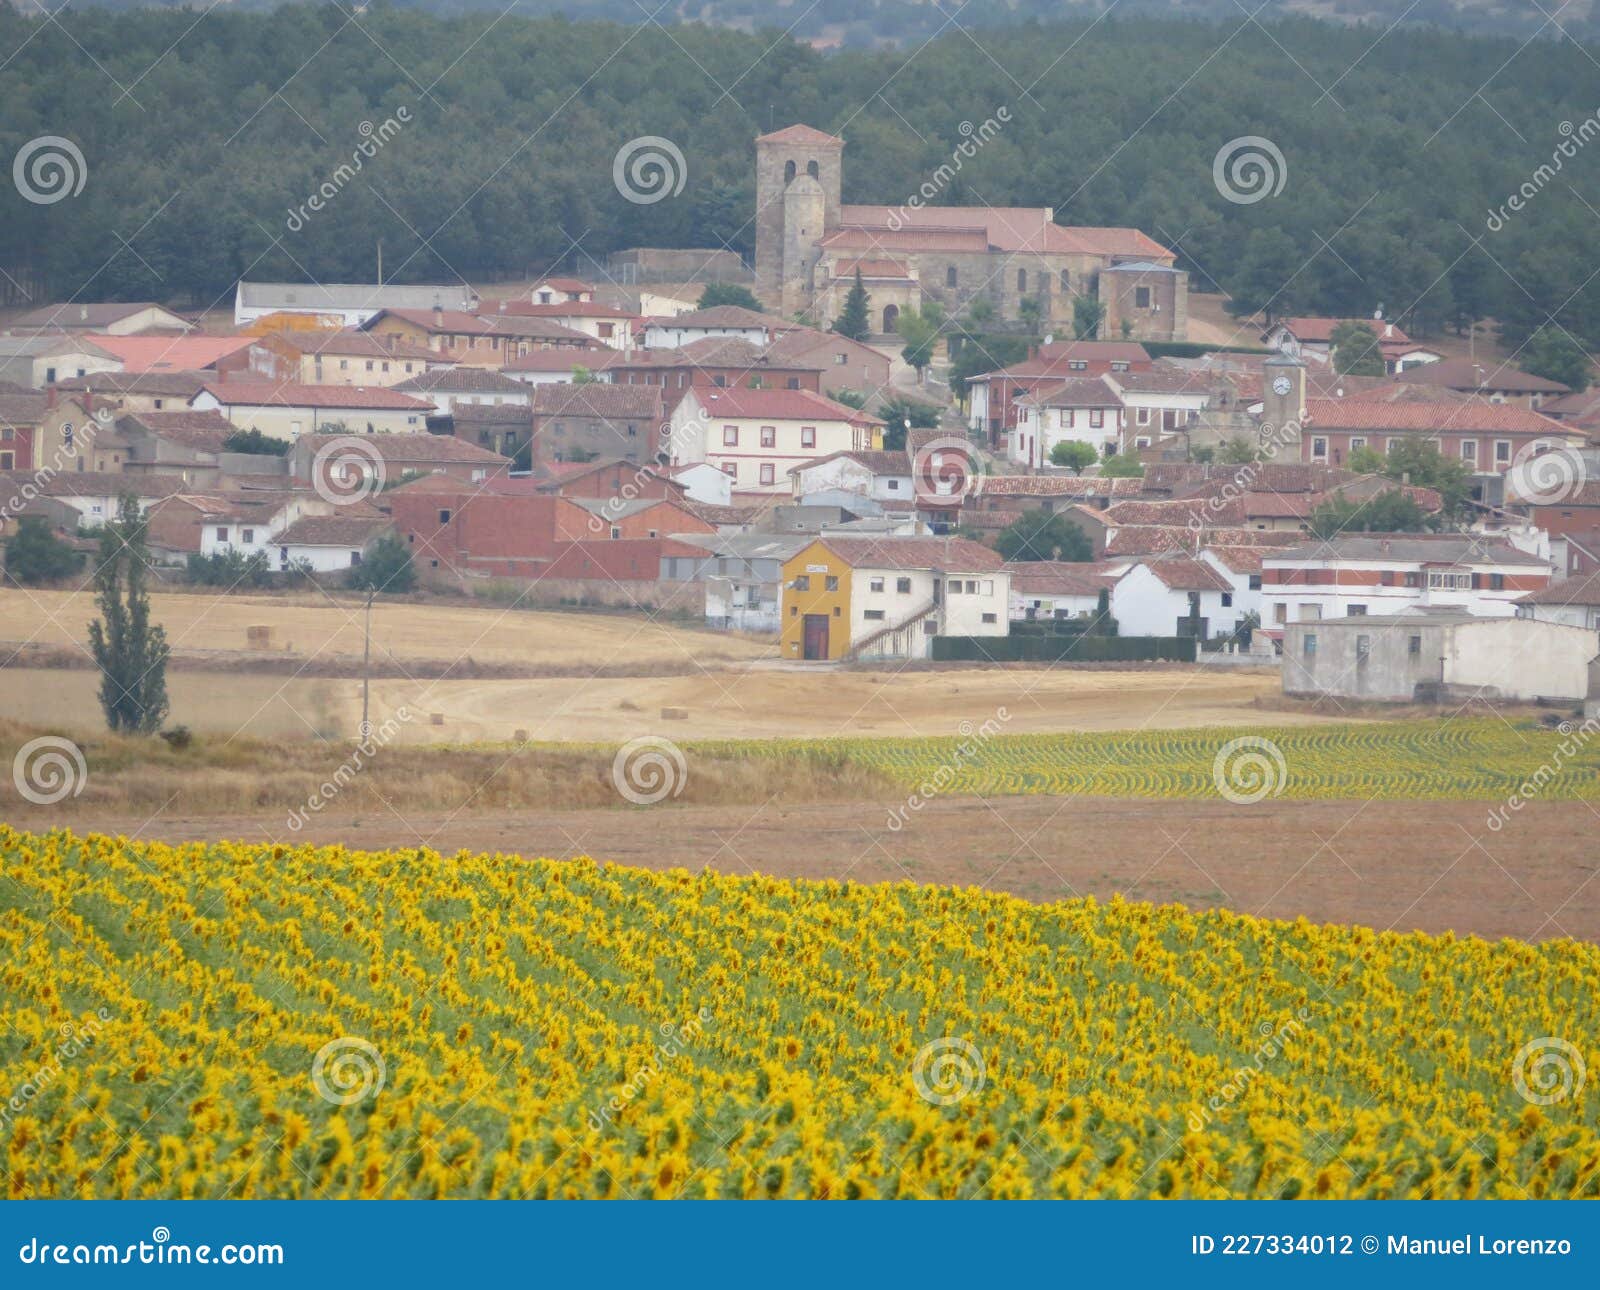 beautiful scenery with yellow sunflowers flowers big pipes